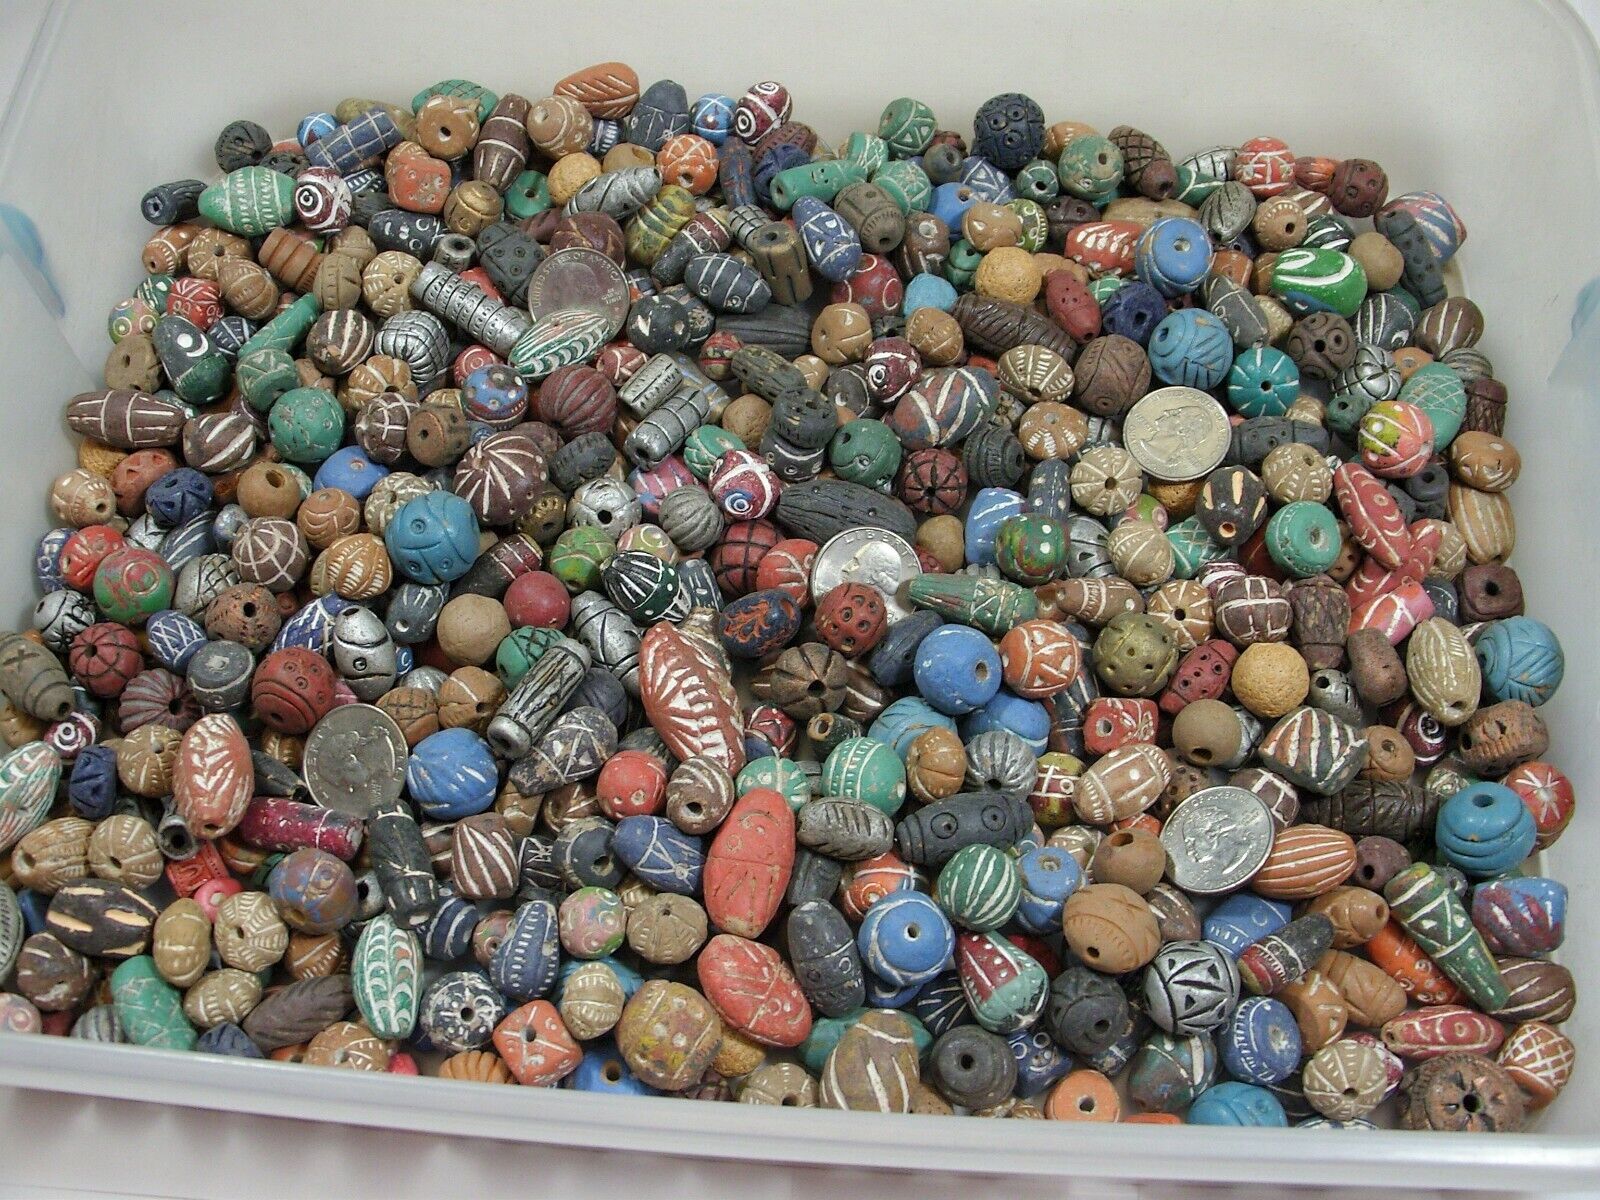 4 Pounds Assorted India Handmade Clay Beads Wholesale Bulk Lot (TPF-65)